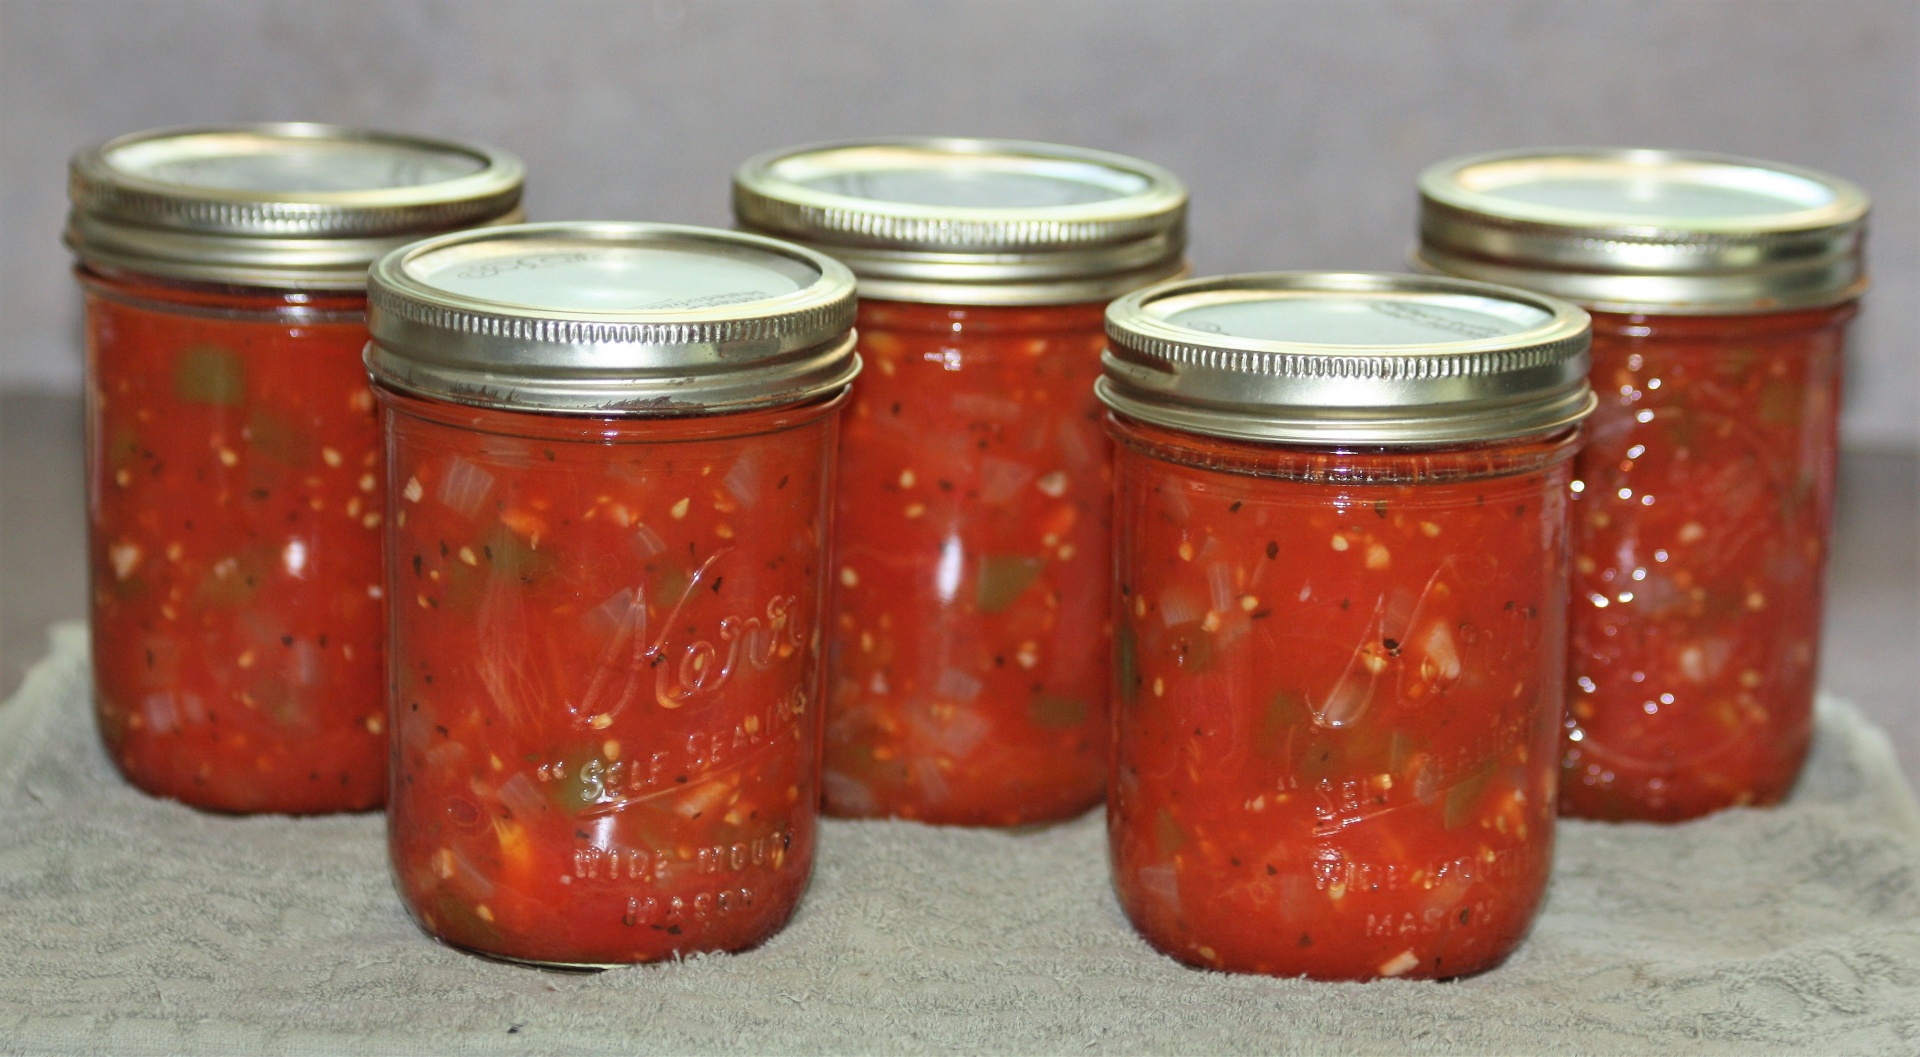 Five jars of canned stewed tomatoes sitting on a gray kitchen towel with a gray background.